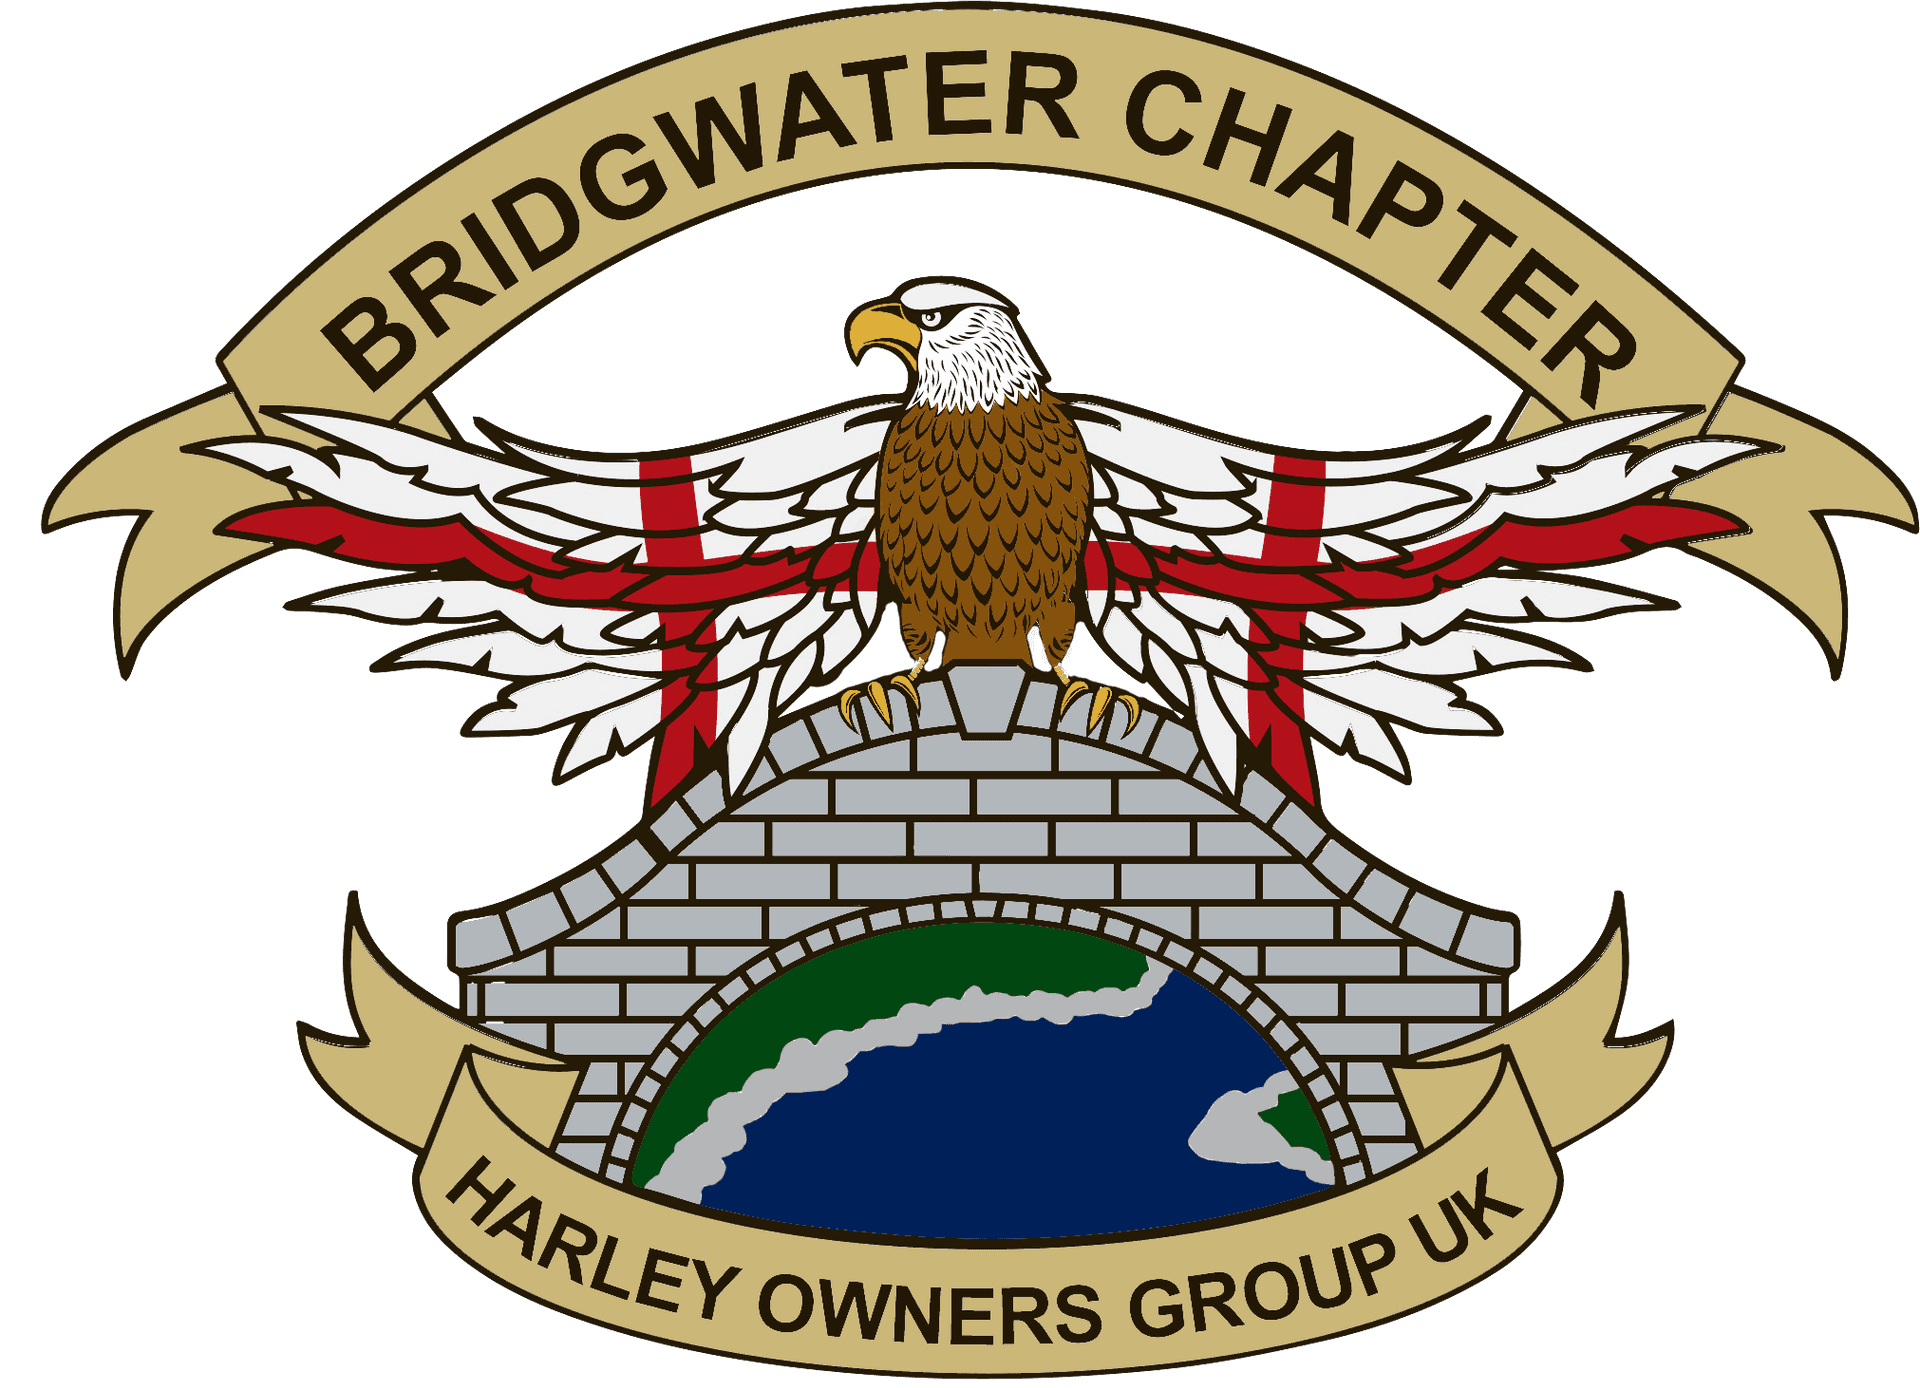 Bridgwater Chapter Harley Owners Group Emblem PNG